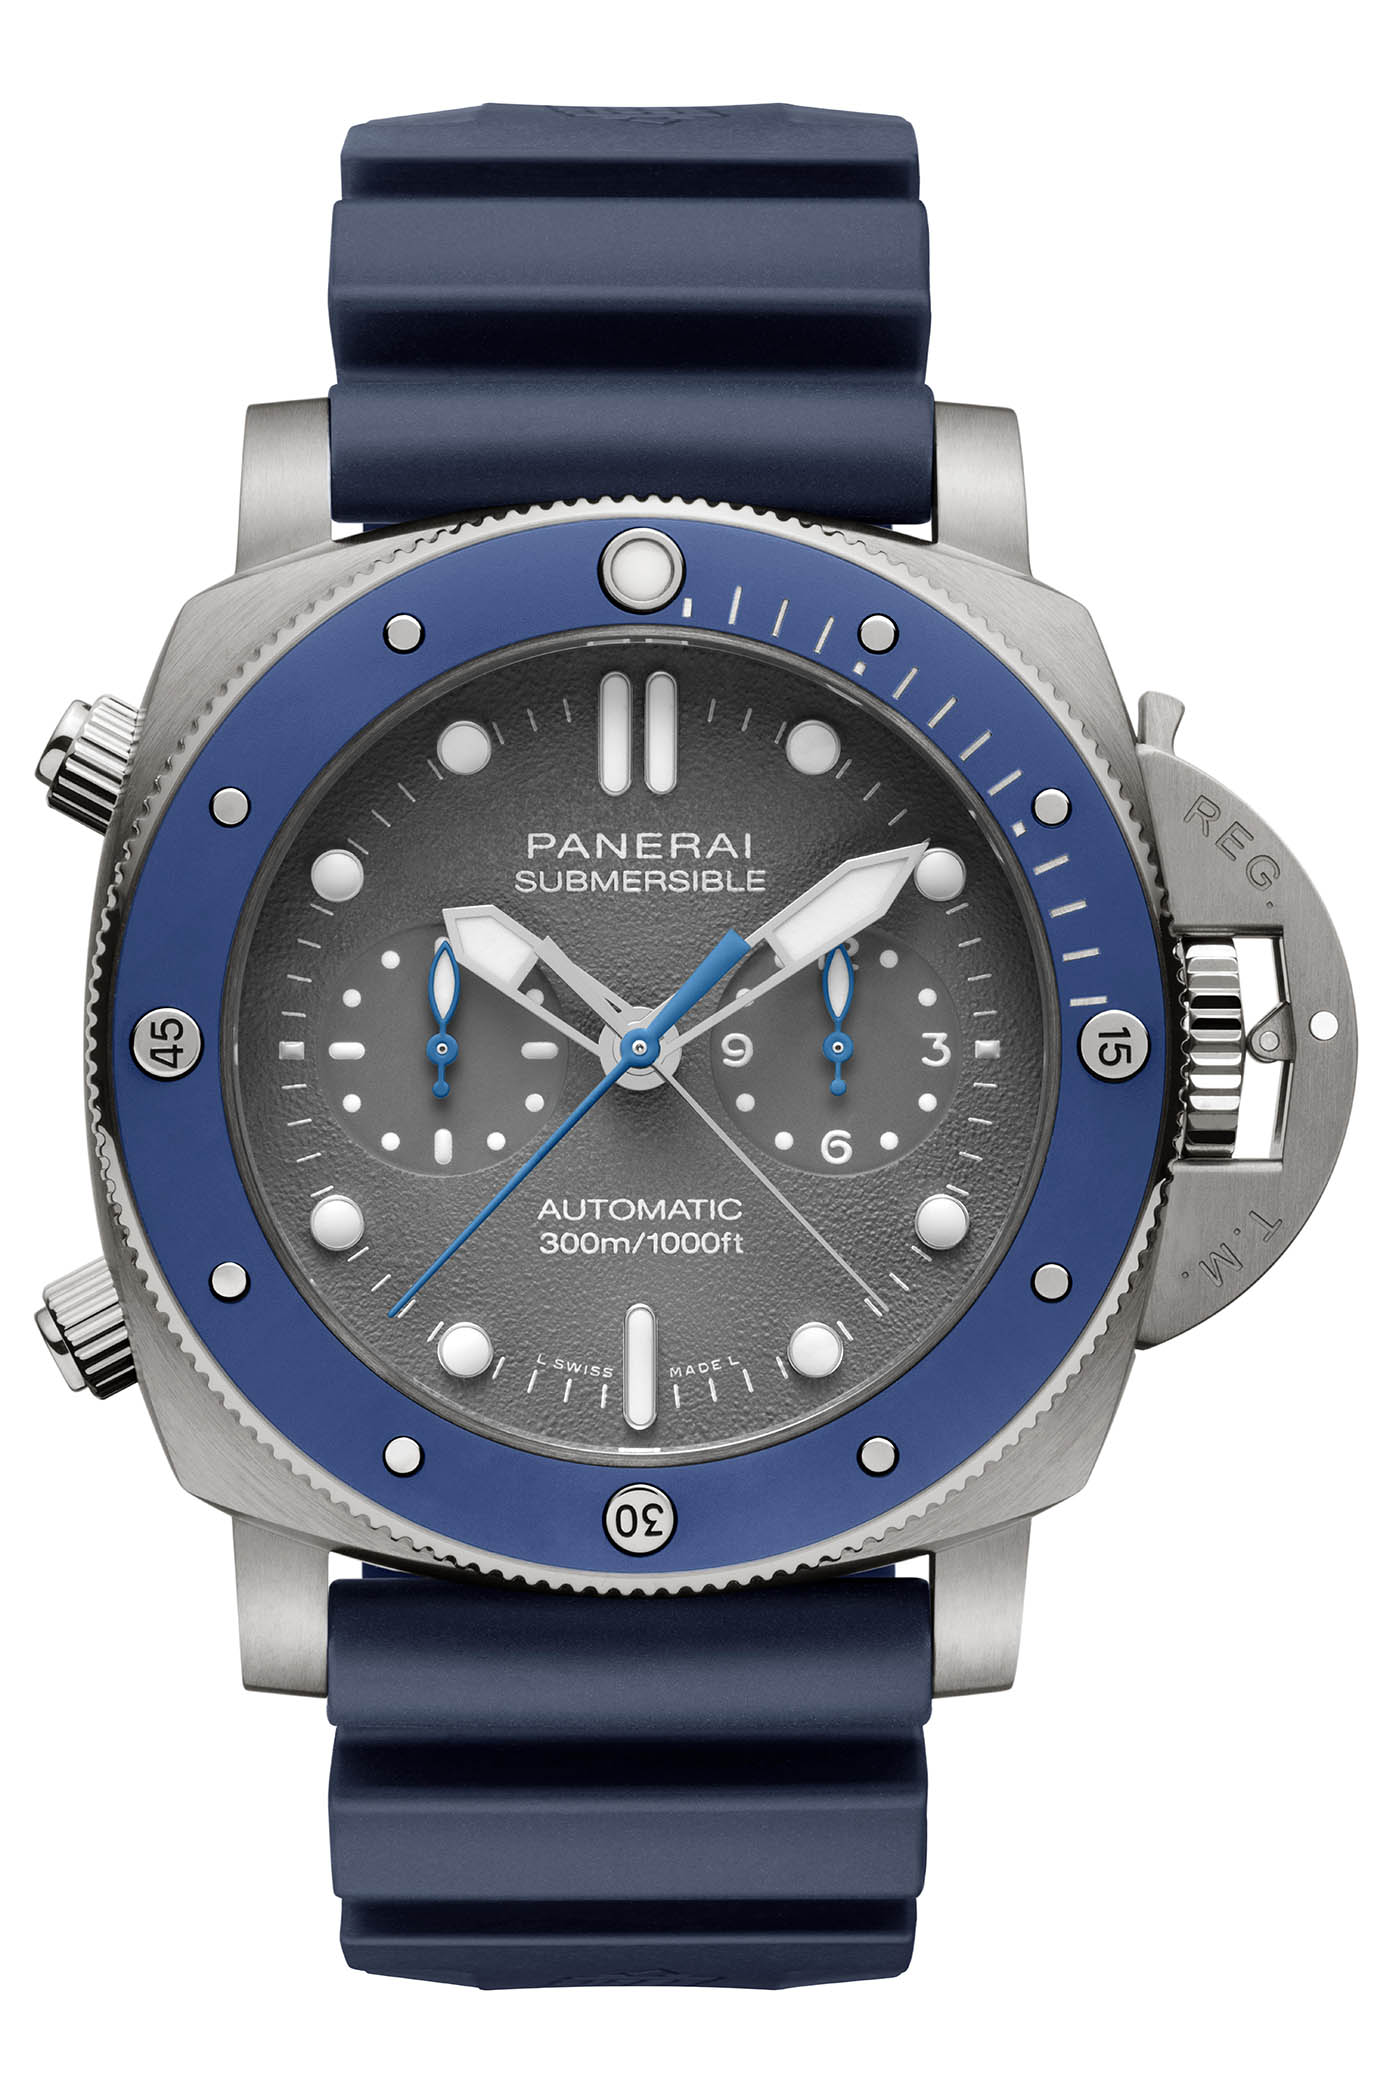 Panerai Submersible Chrono Guillaume Nery Edition PAM00982 - Pre-SIHH 2019